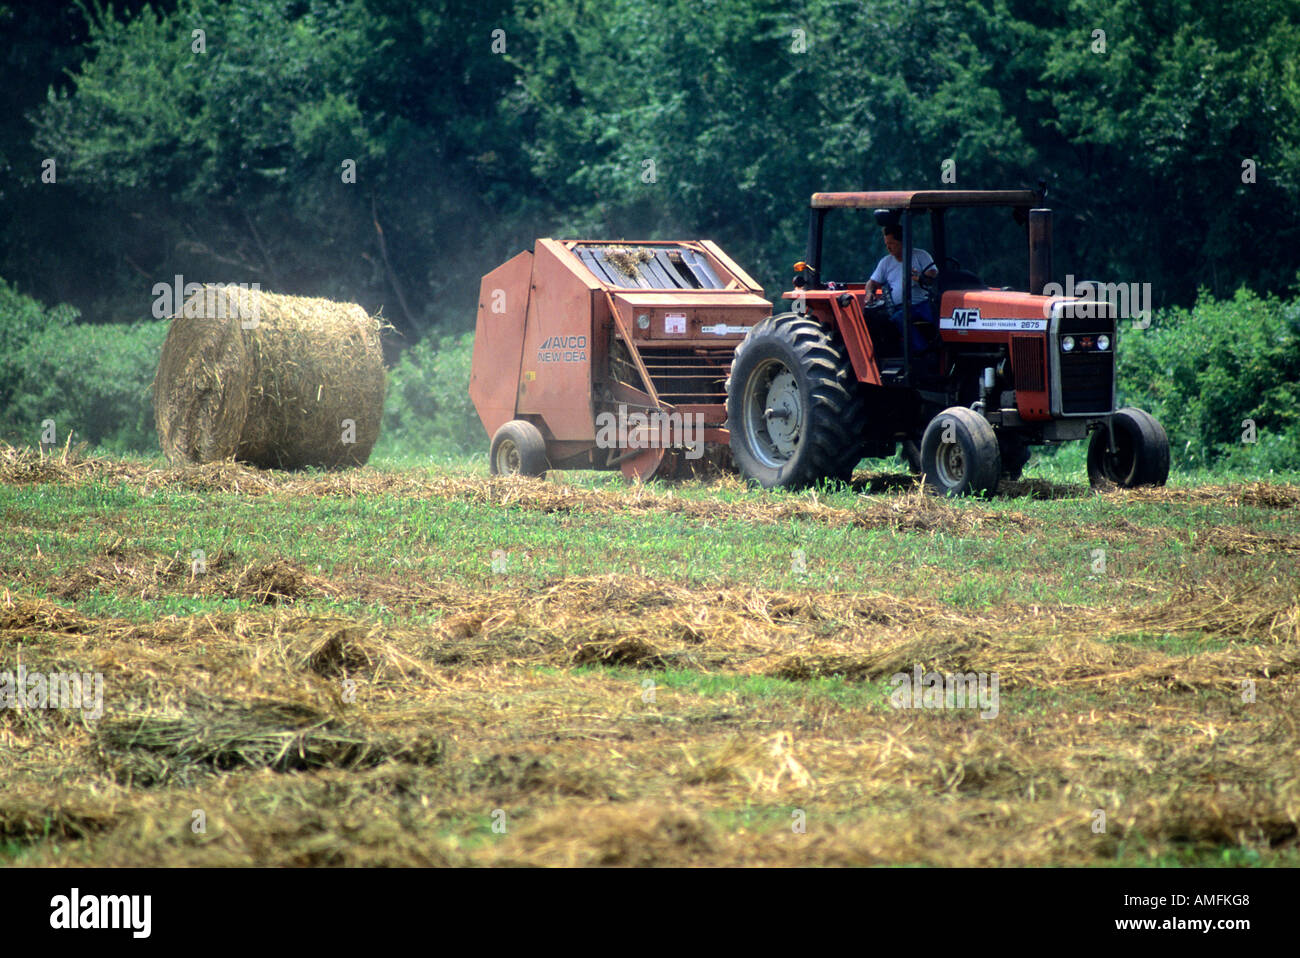 A tractor pulling a round hay baler. Stock Photo